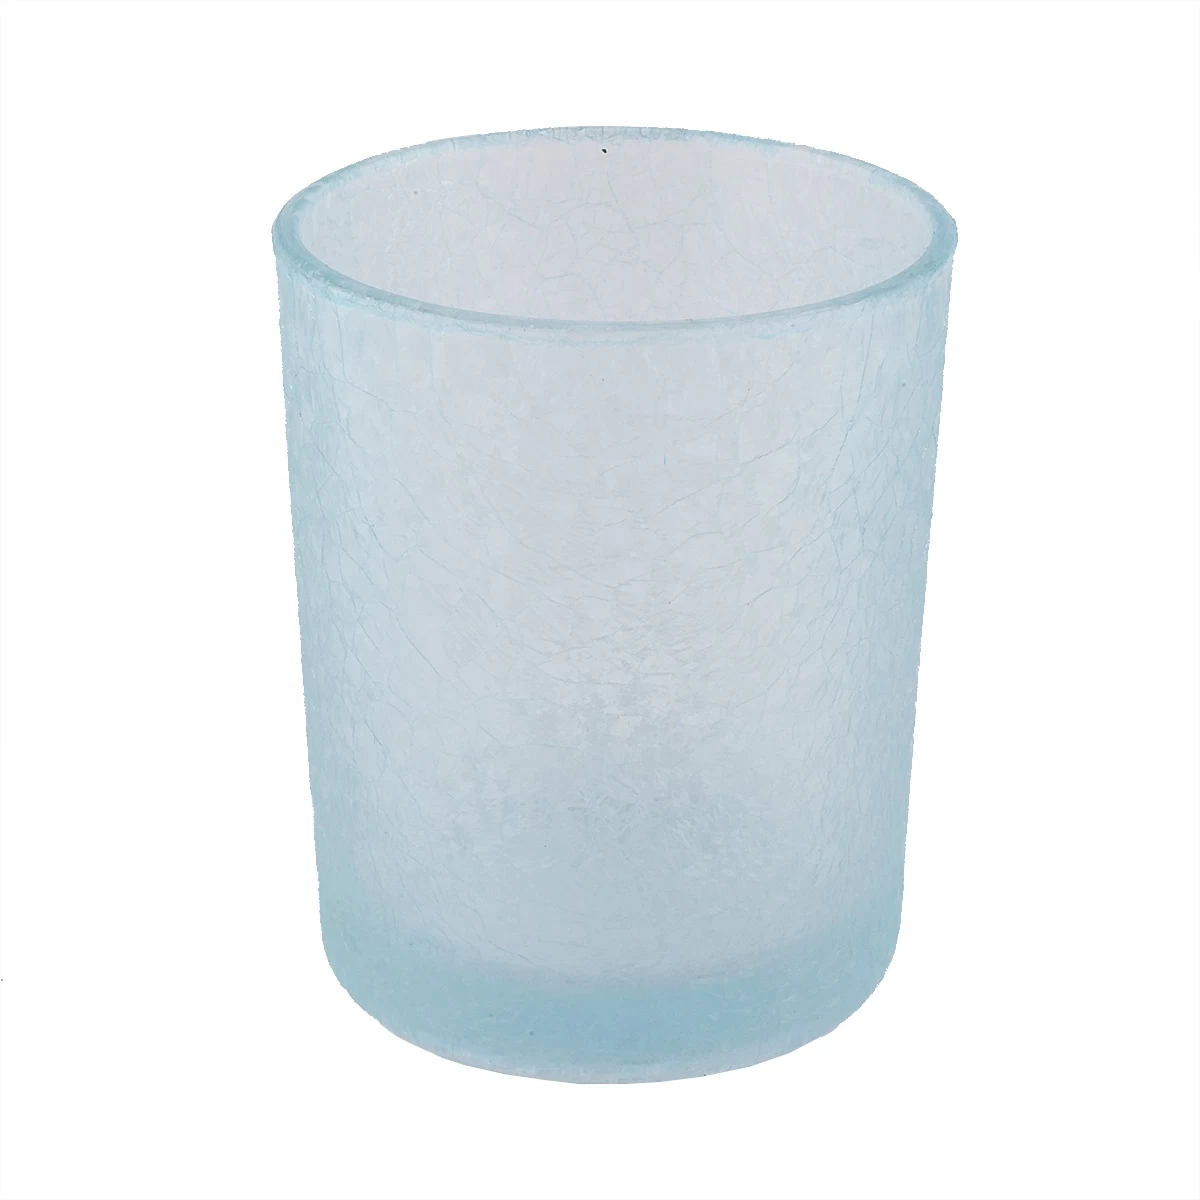 Sunny luxury candle containers with frosted color